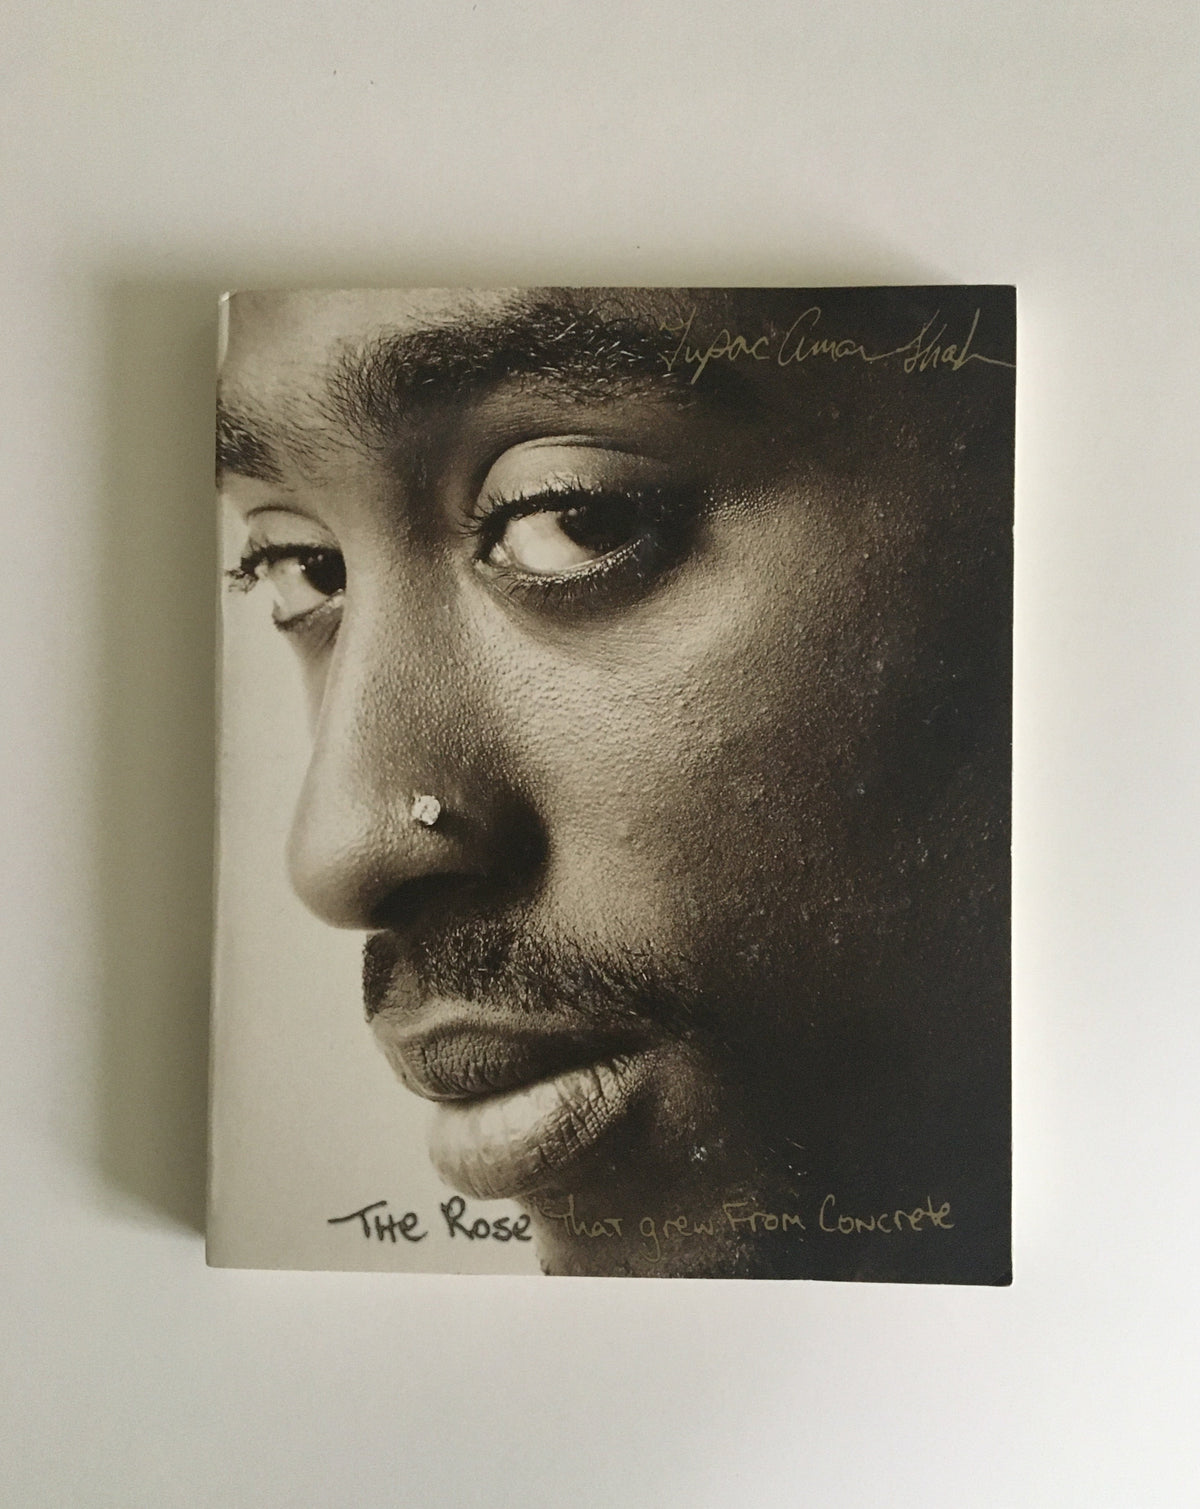 The Rose That Grew From the Concrete by Tupac Shakur